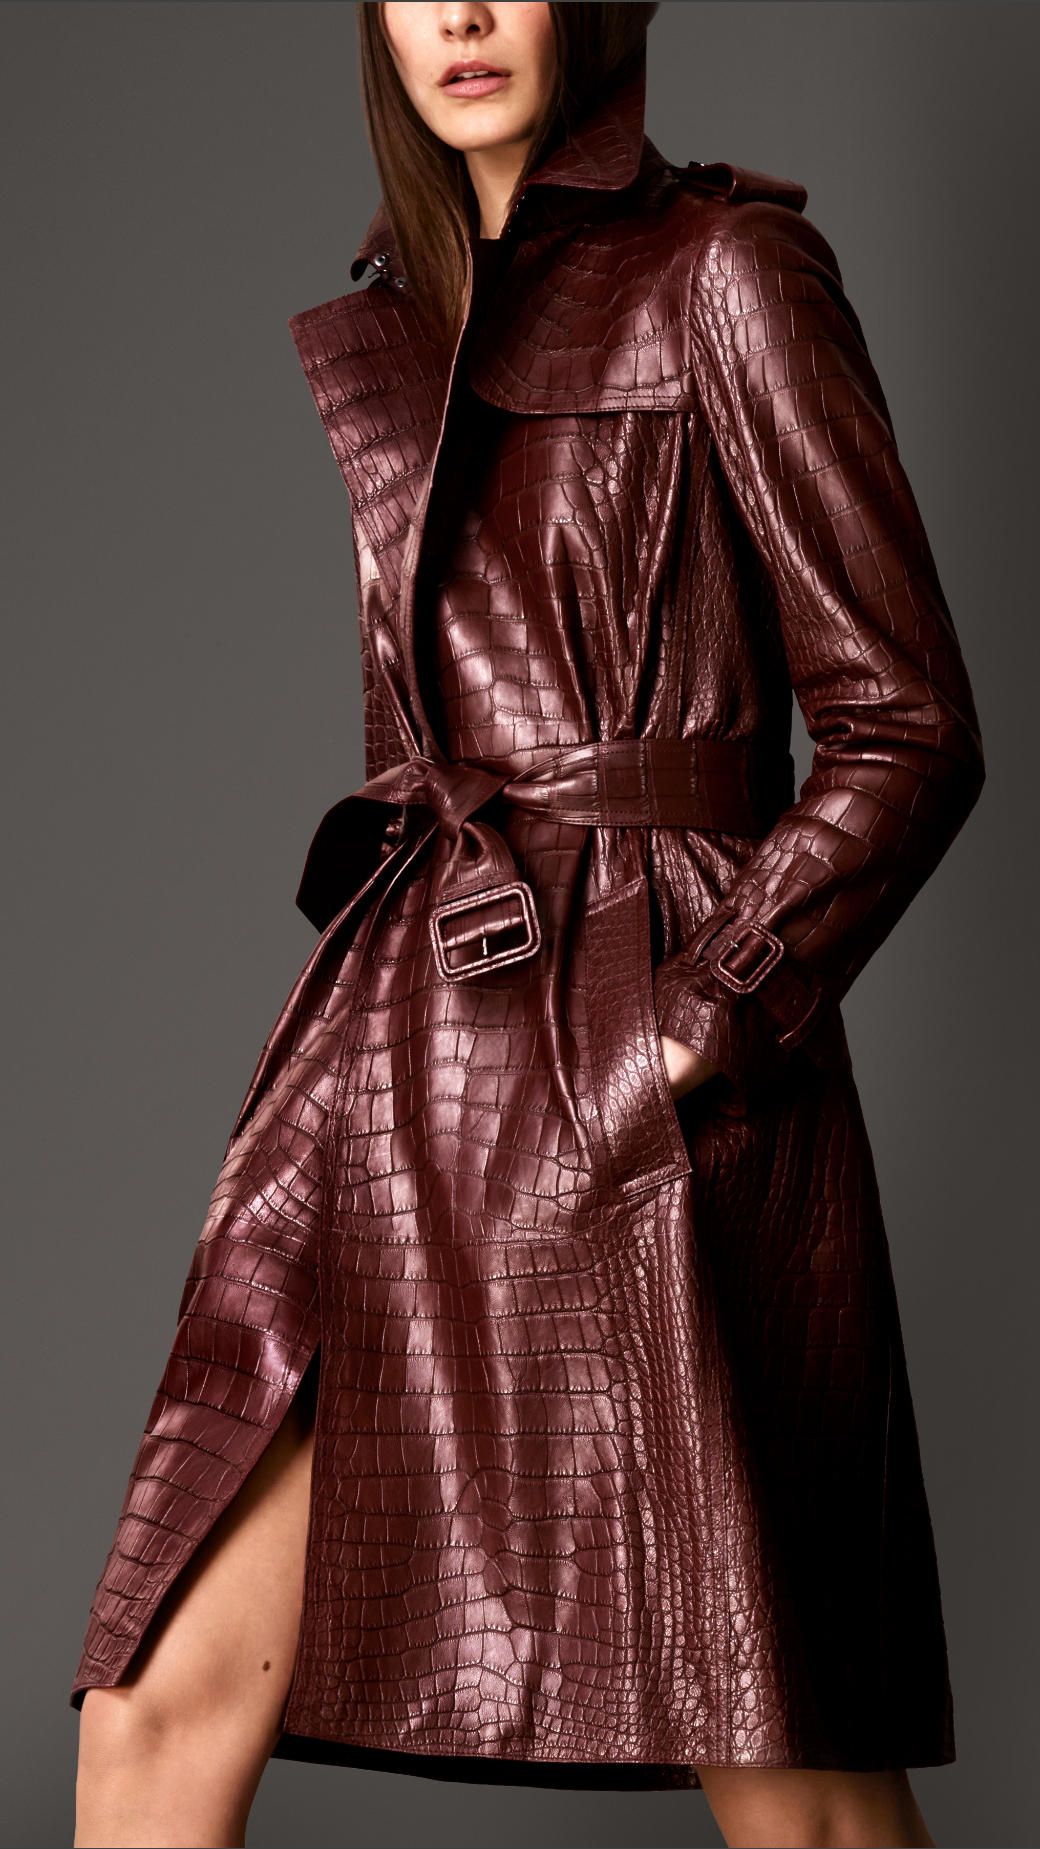 Burberry Leather Alligator Wrap Trench Coat in Maroon (Purple) - Lyst